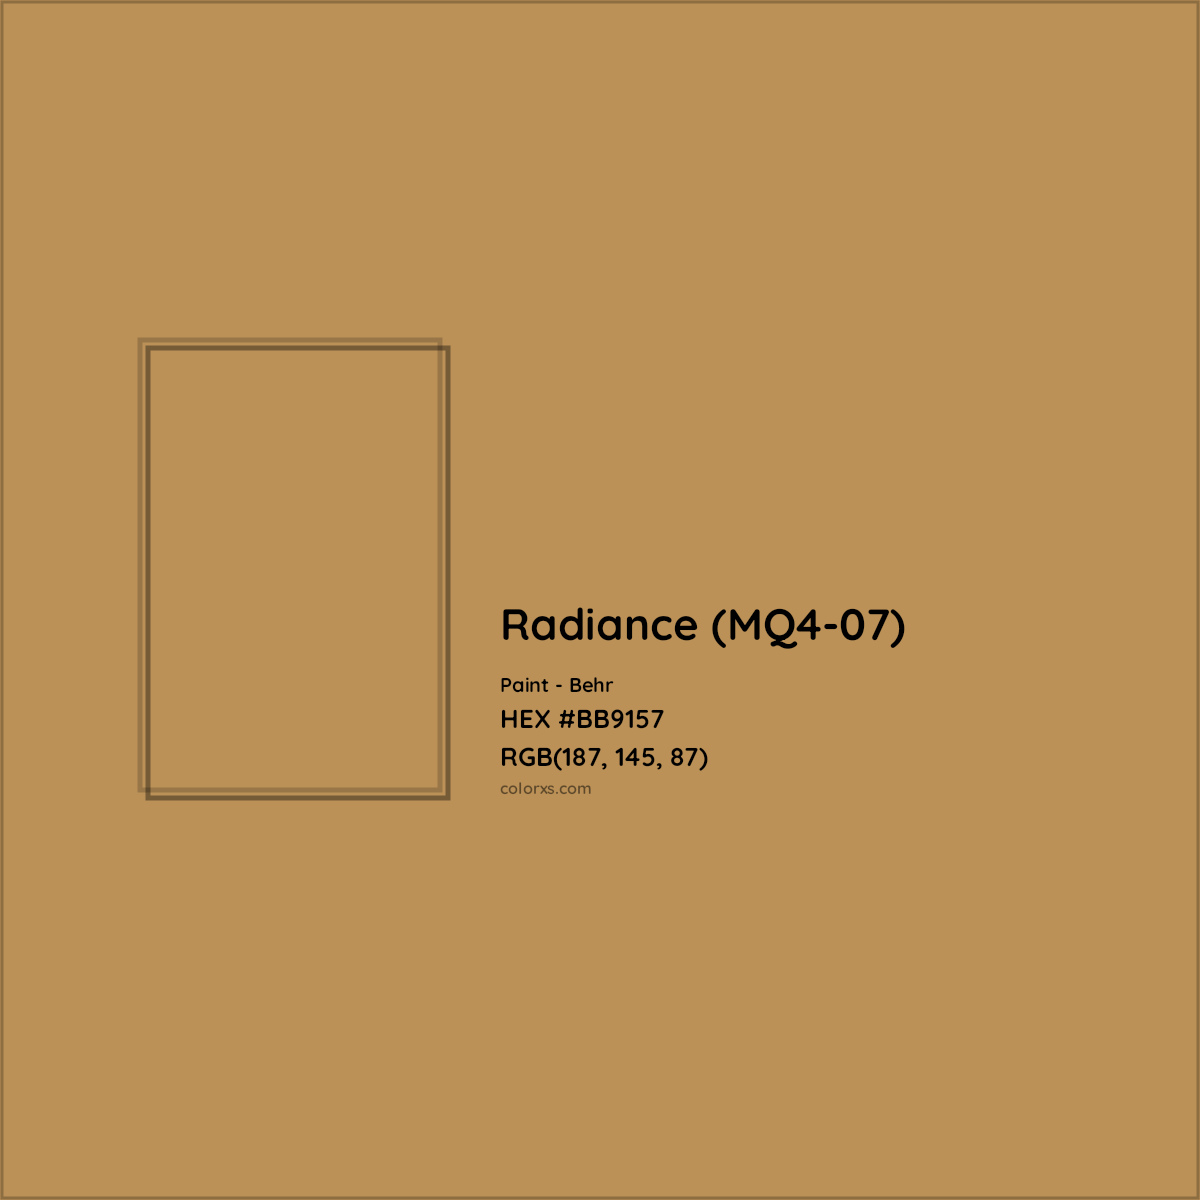 HEX #BB9157 Radiance (MQ4-07) Paint Behr - Color Code